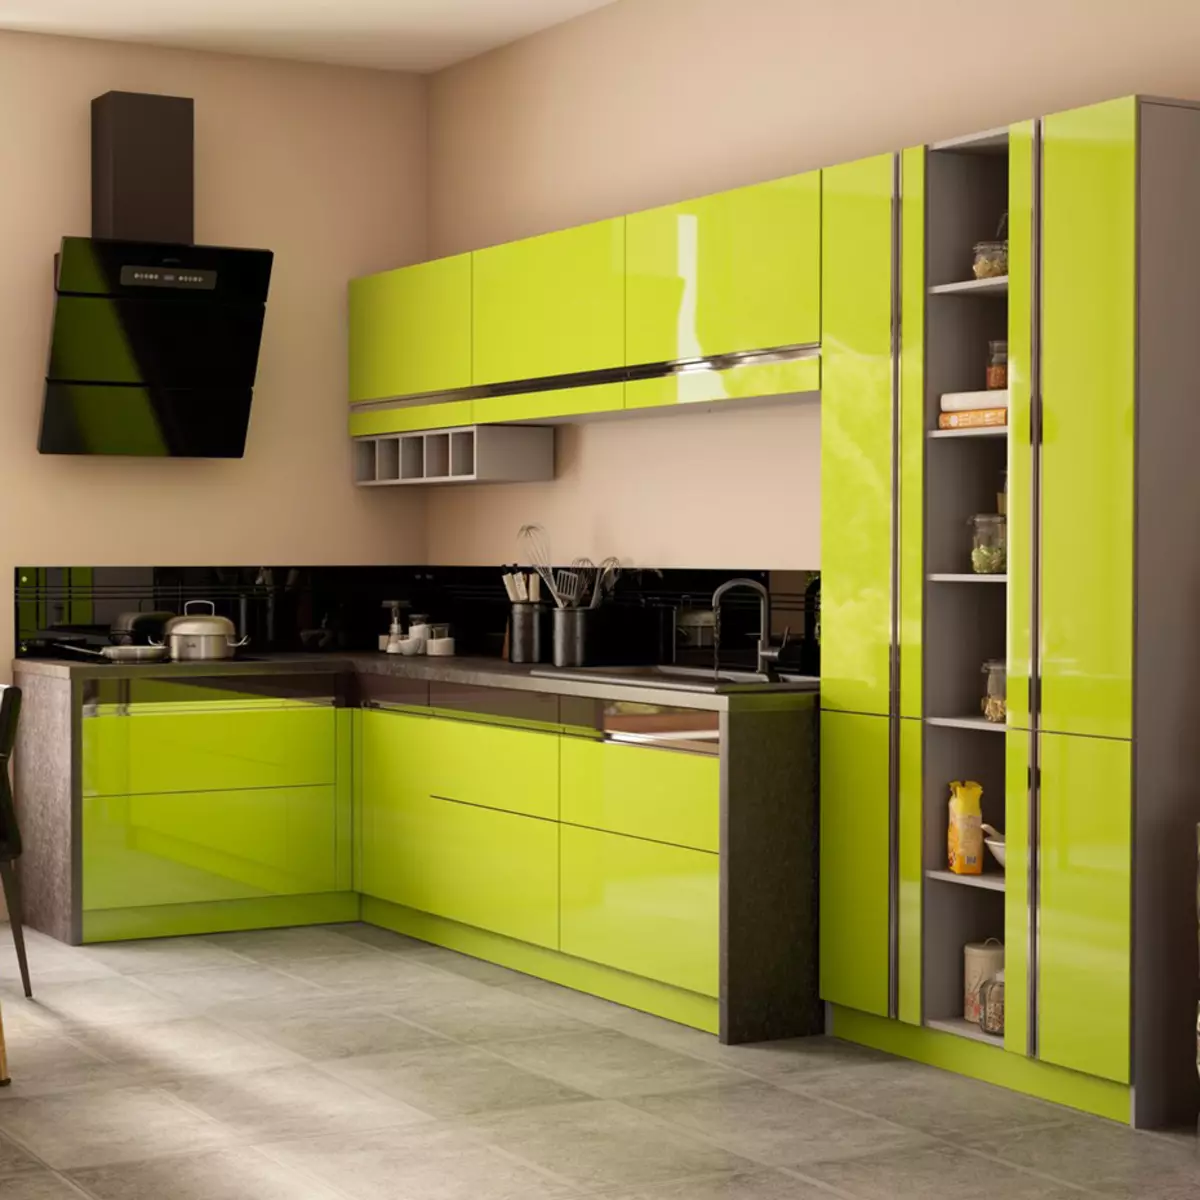 Kitchen Lime (52 photos): Lyme-colored kitchen headset with wenge, white and other shades in the kitchen interior. What other shades are combined with lime? 9551_23